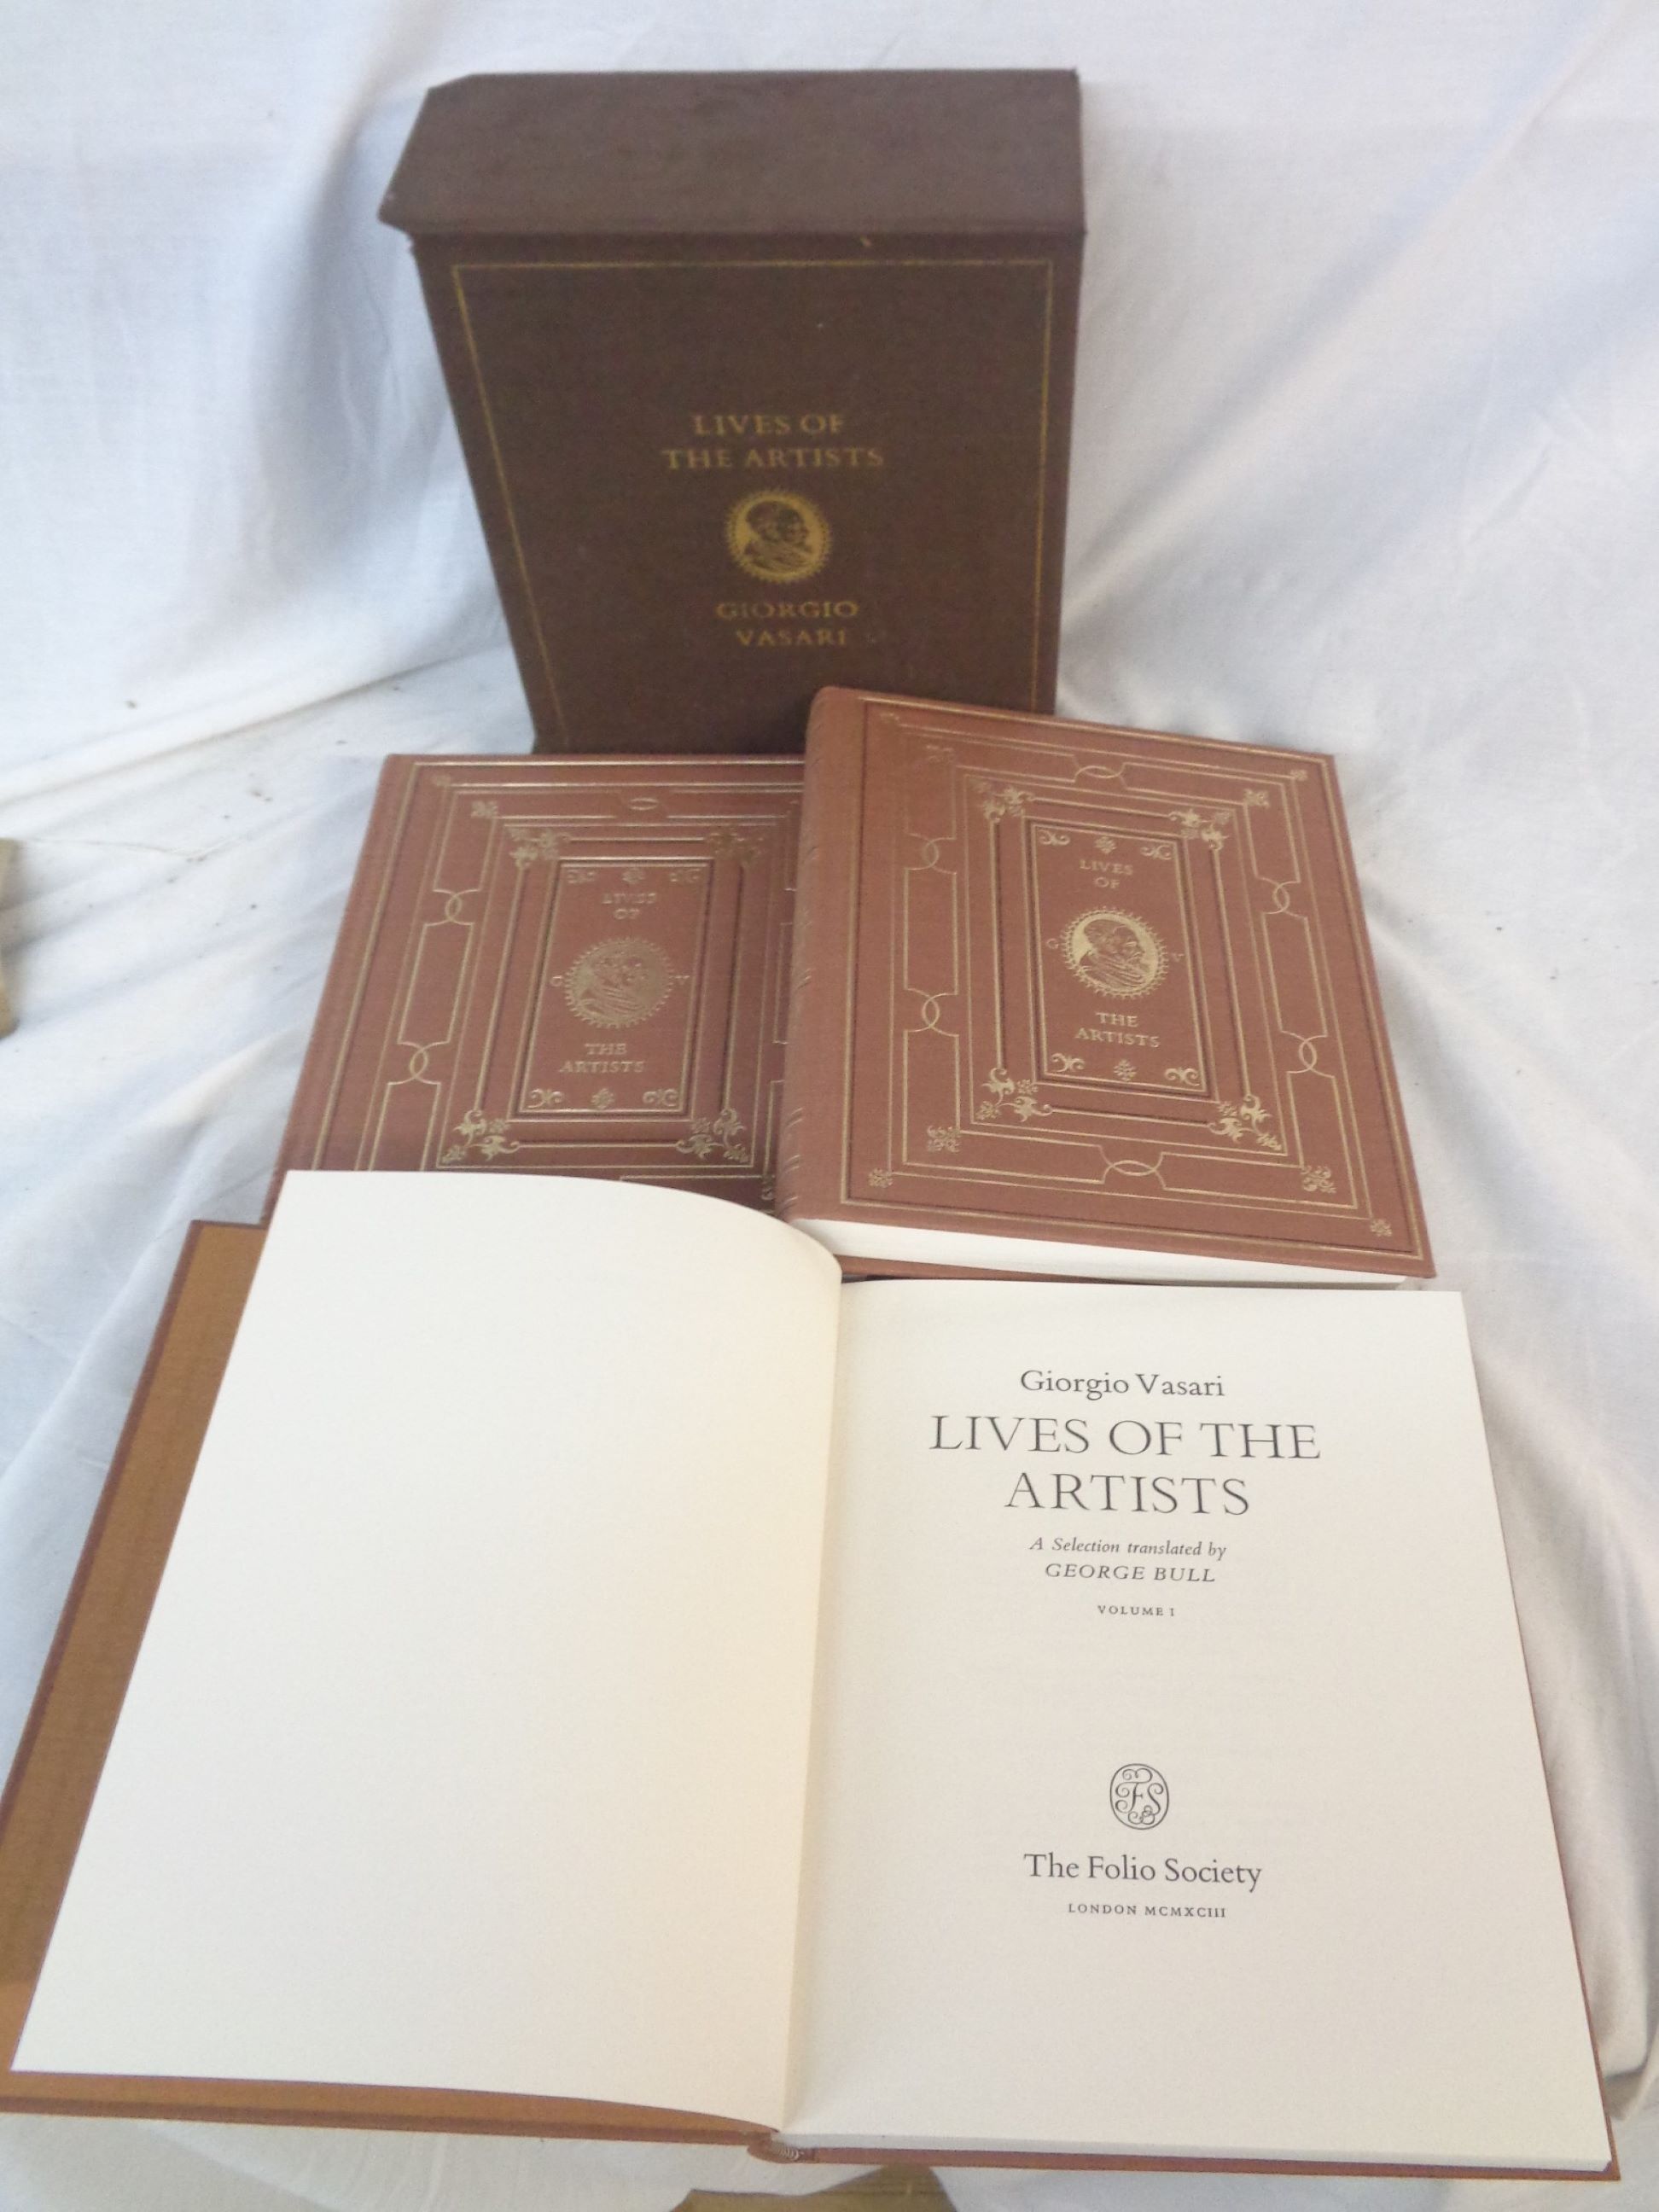 Lives of the Artists: by Giorgio Vasari, box sleeved 3vols., brown gilt cloth, 8vo., Pub. The